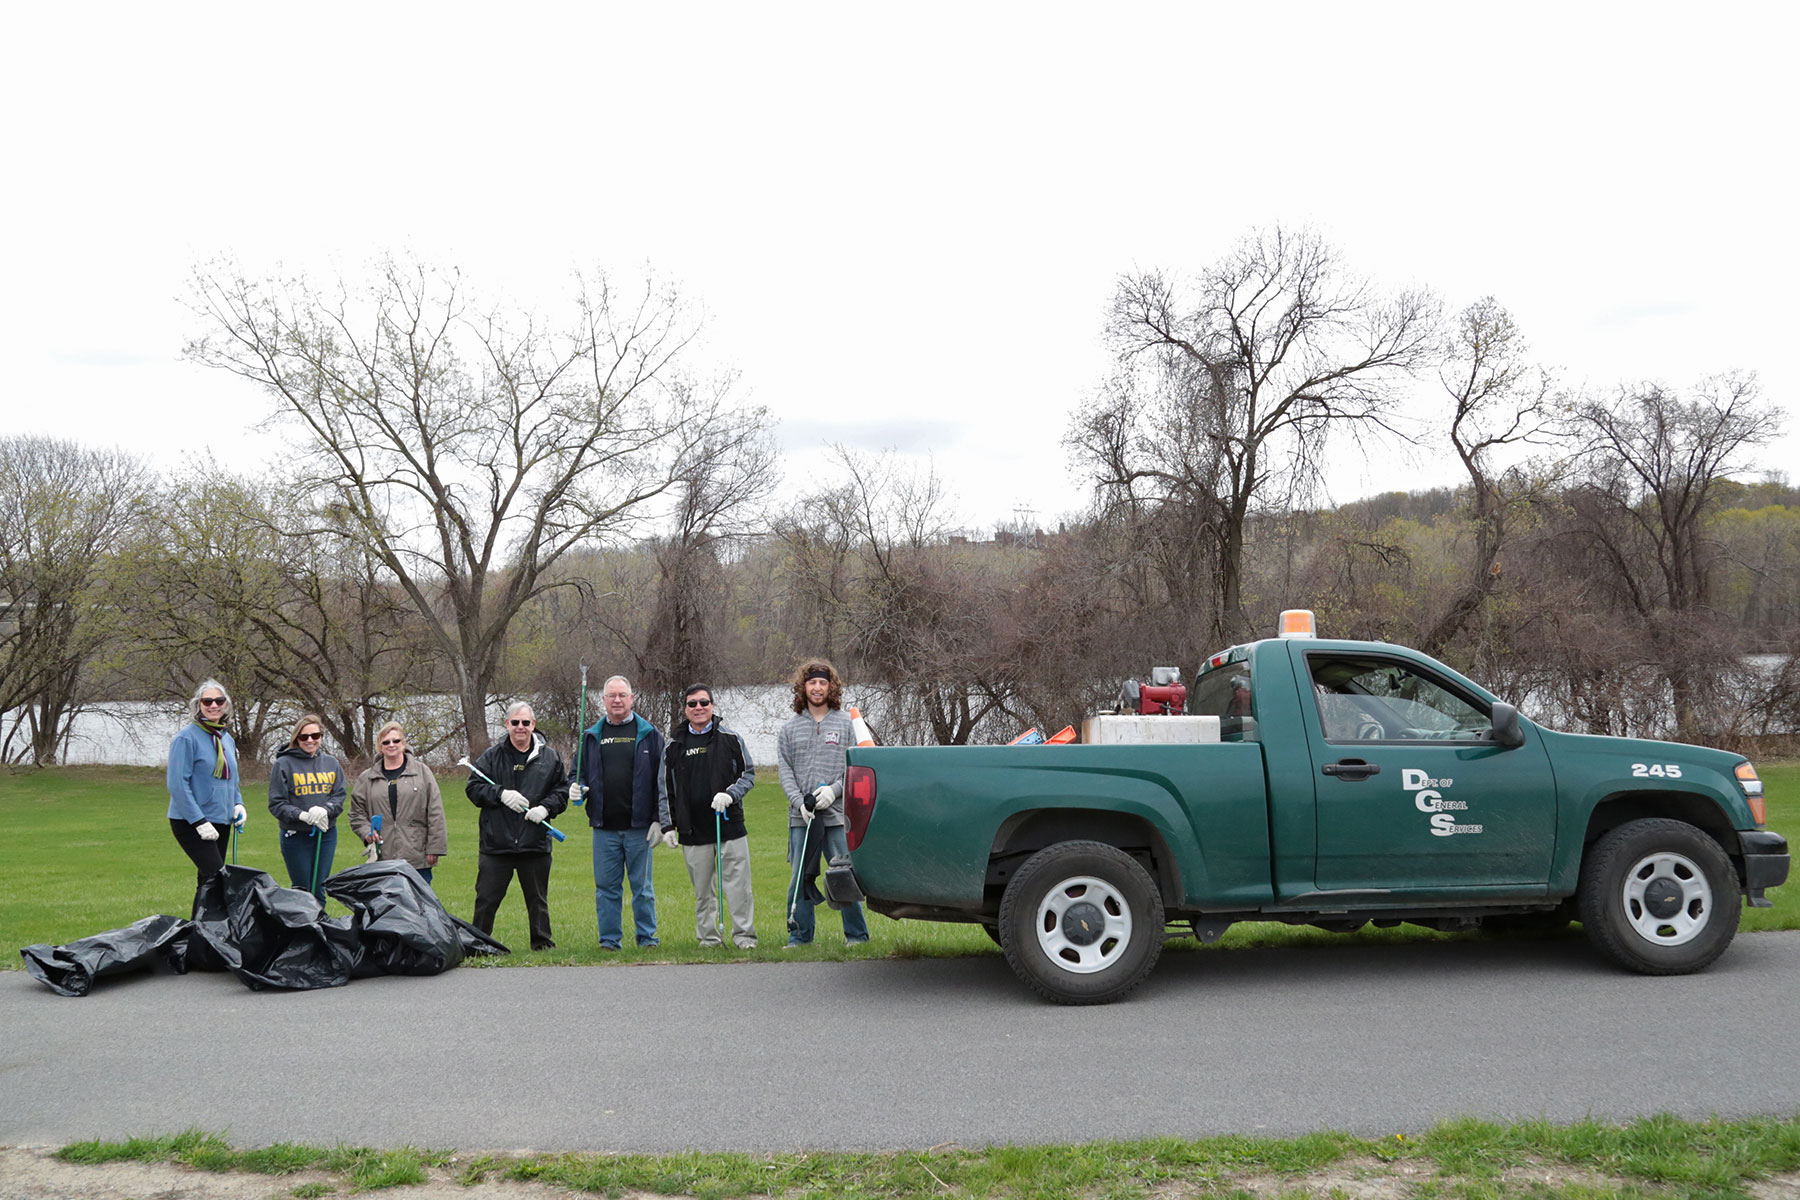 SUNY Poly staff with NYS Dept of General Services truck in front of them as they clean up outdoor park space.